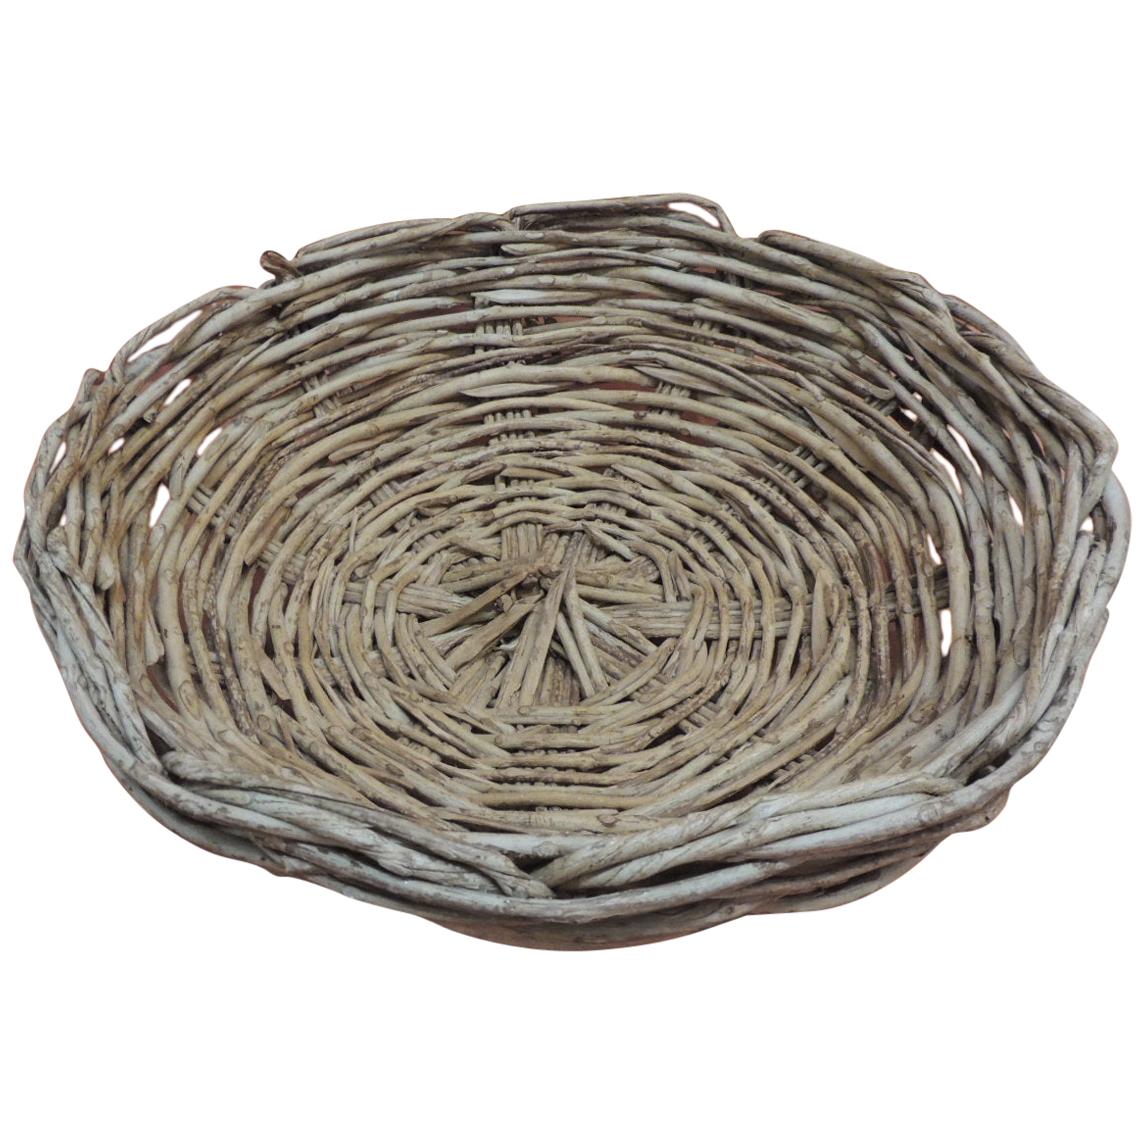 Vintage Large Round Rustic Style Willow Woven Basket/ Bowl